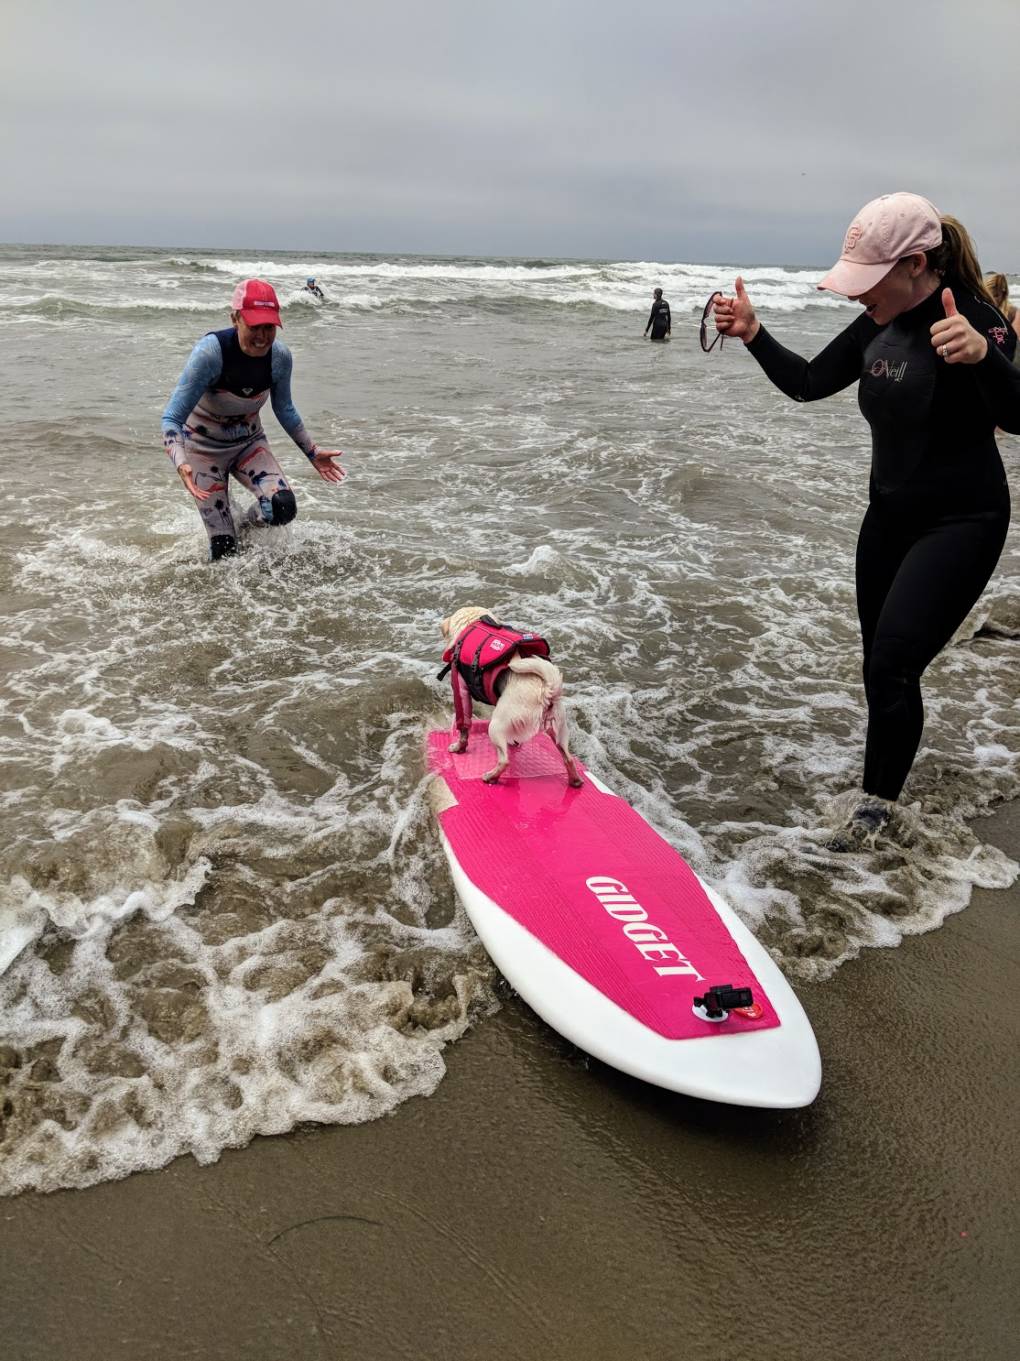 Gidget the pug gets the thumbs-up after a spectacular run in the final surf-off event. 